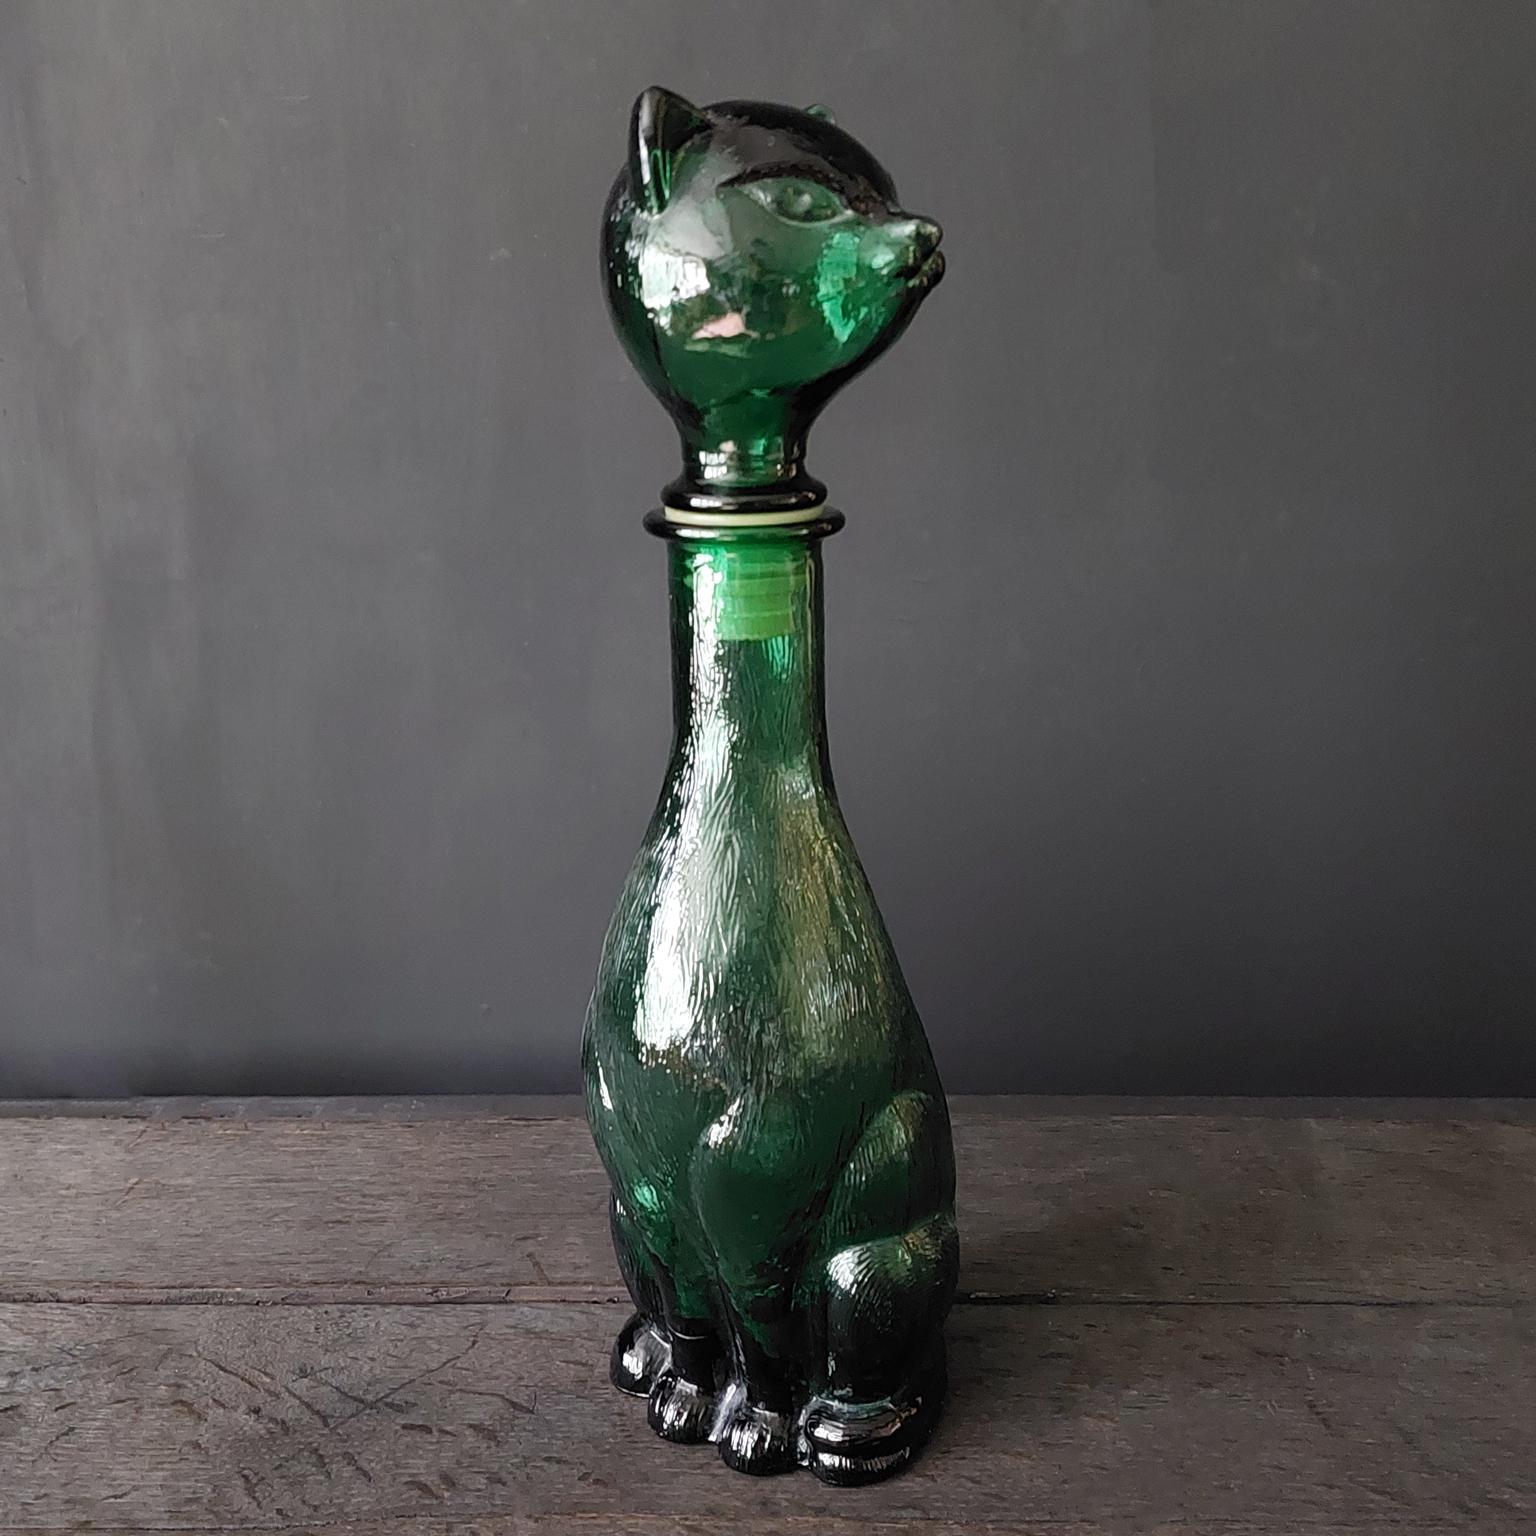 1960s Italian Empoli MCM green glass cute cat bottle.

Mention Italian glass and probably everyone’s mind immediately leaps to Venice and Murano. 
But there is another almost equally famous centre of Italian glass making known as Empoli.  

The